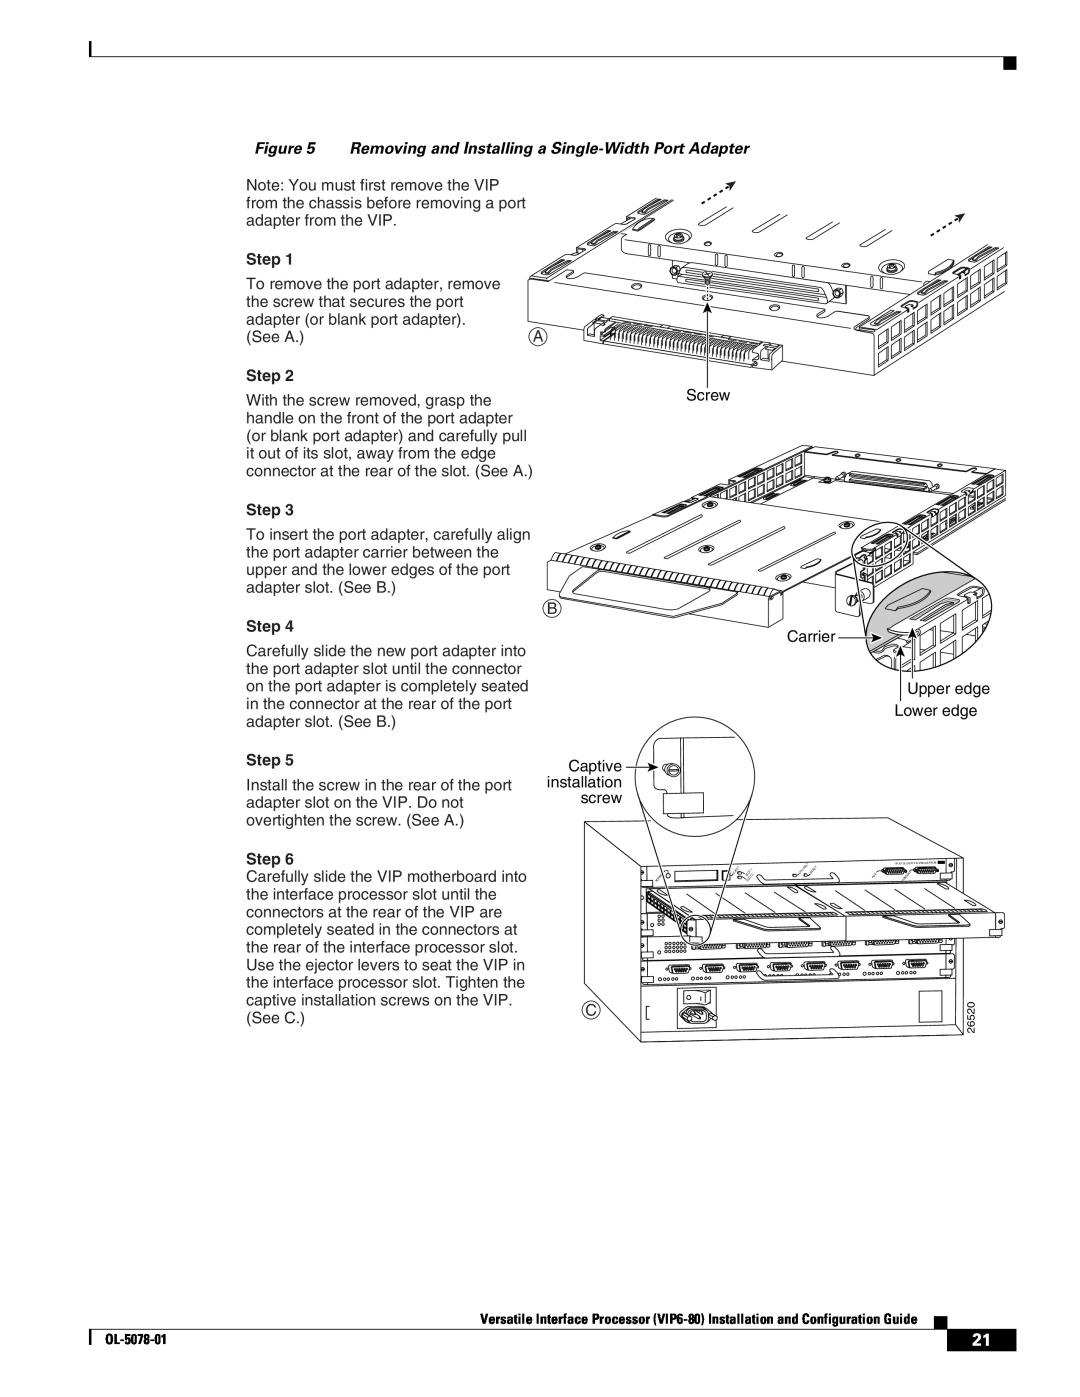 Cisco Systems (VIP6-80) manual Removing and Installing a Single-Width Port Adapter, Step 